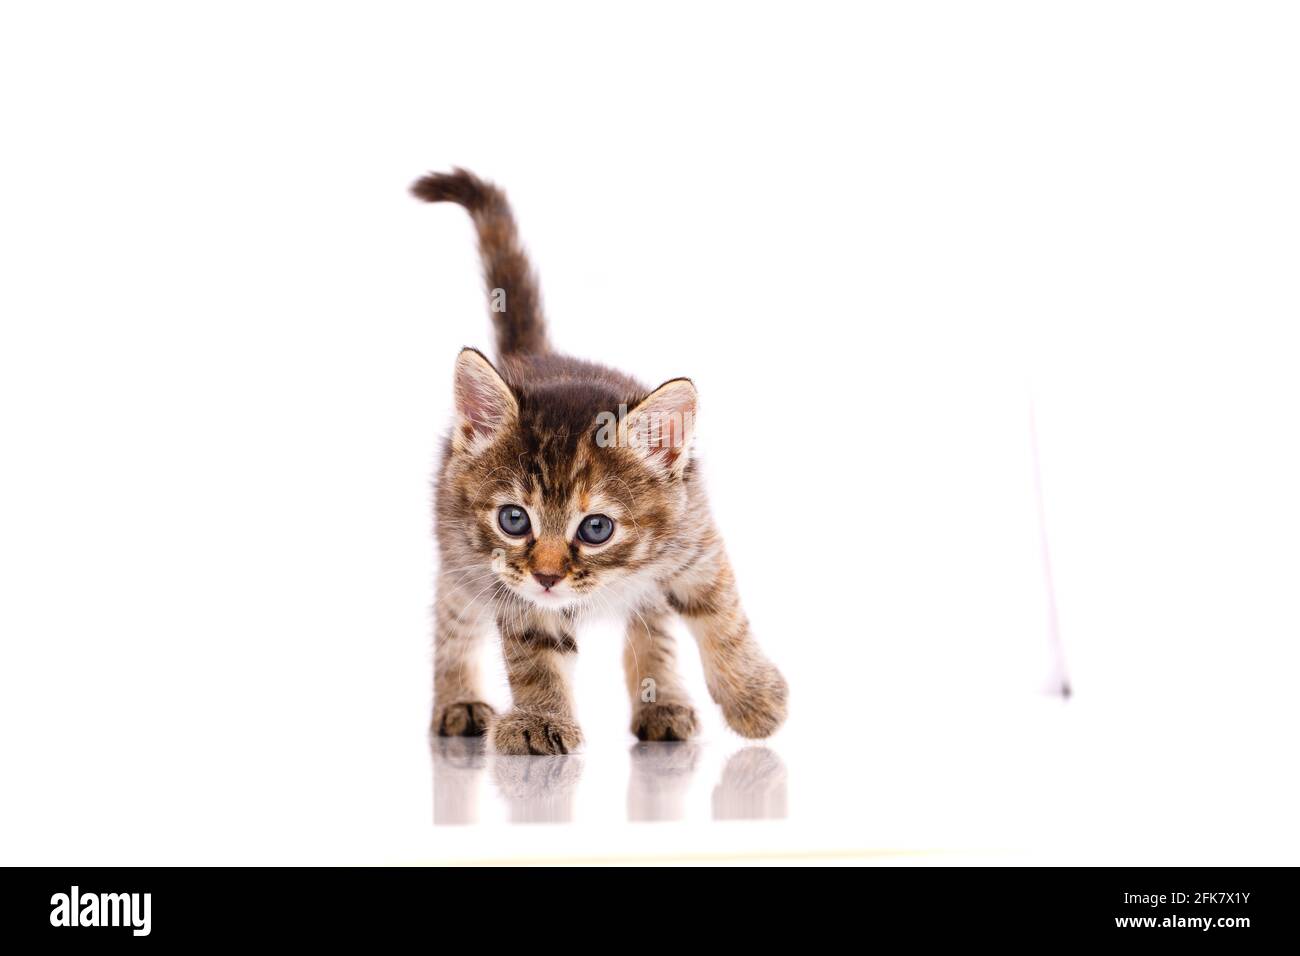 One short haired baby cat on white background. Shooting homeless animals in the studio. Home search concept for animals. Stock Photo